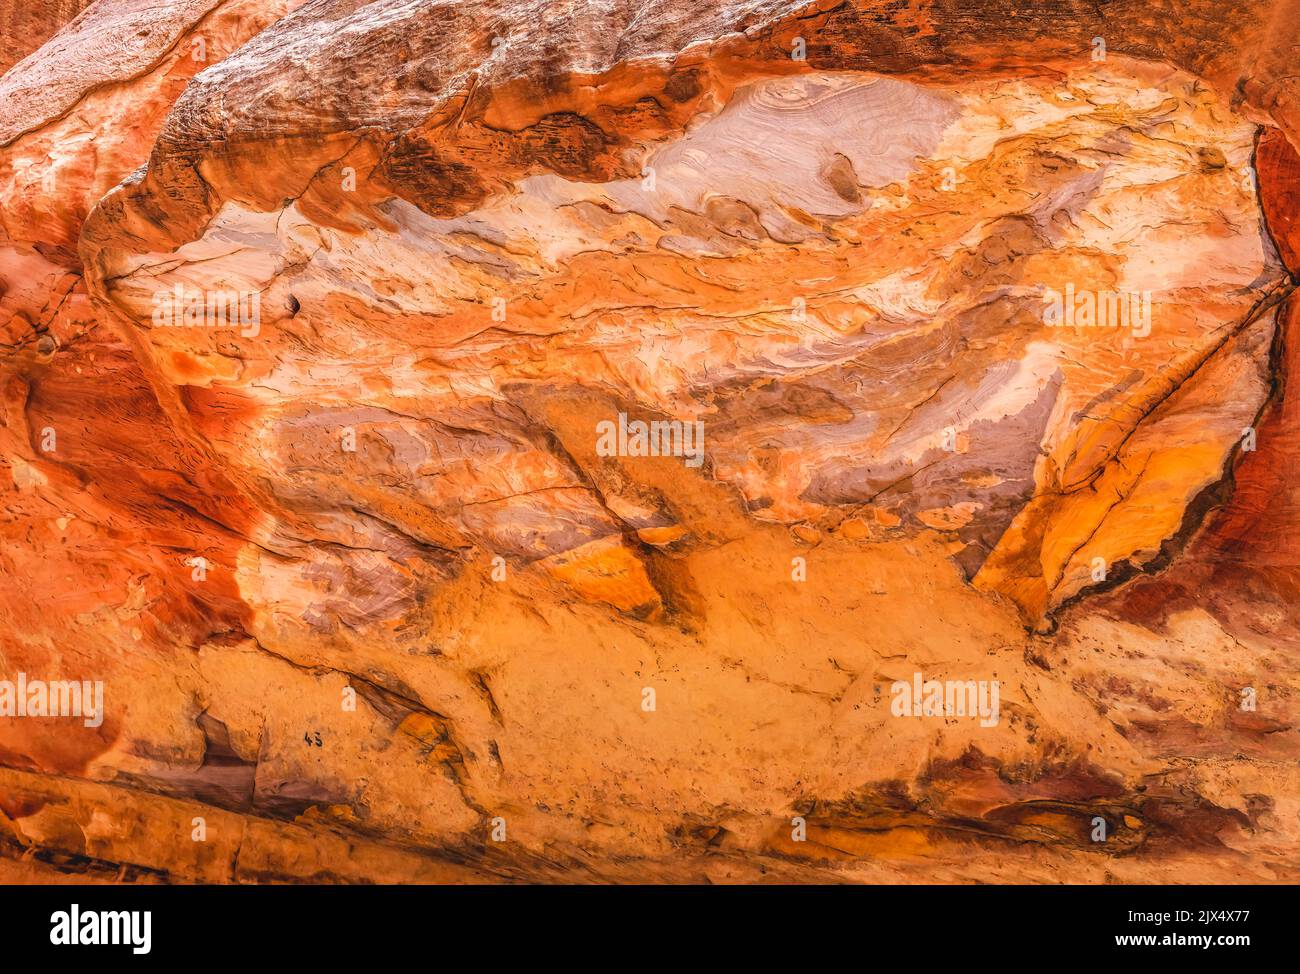 Colorful Canyon Wall Outher Siq Petra Jordan  Built by the Nabataens in 200 BC to 400 AD Canyon walls create many abstracts close up Stock Photo